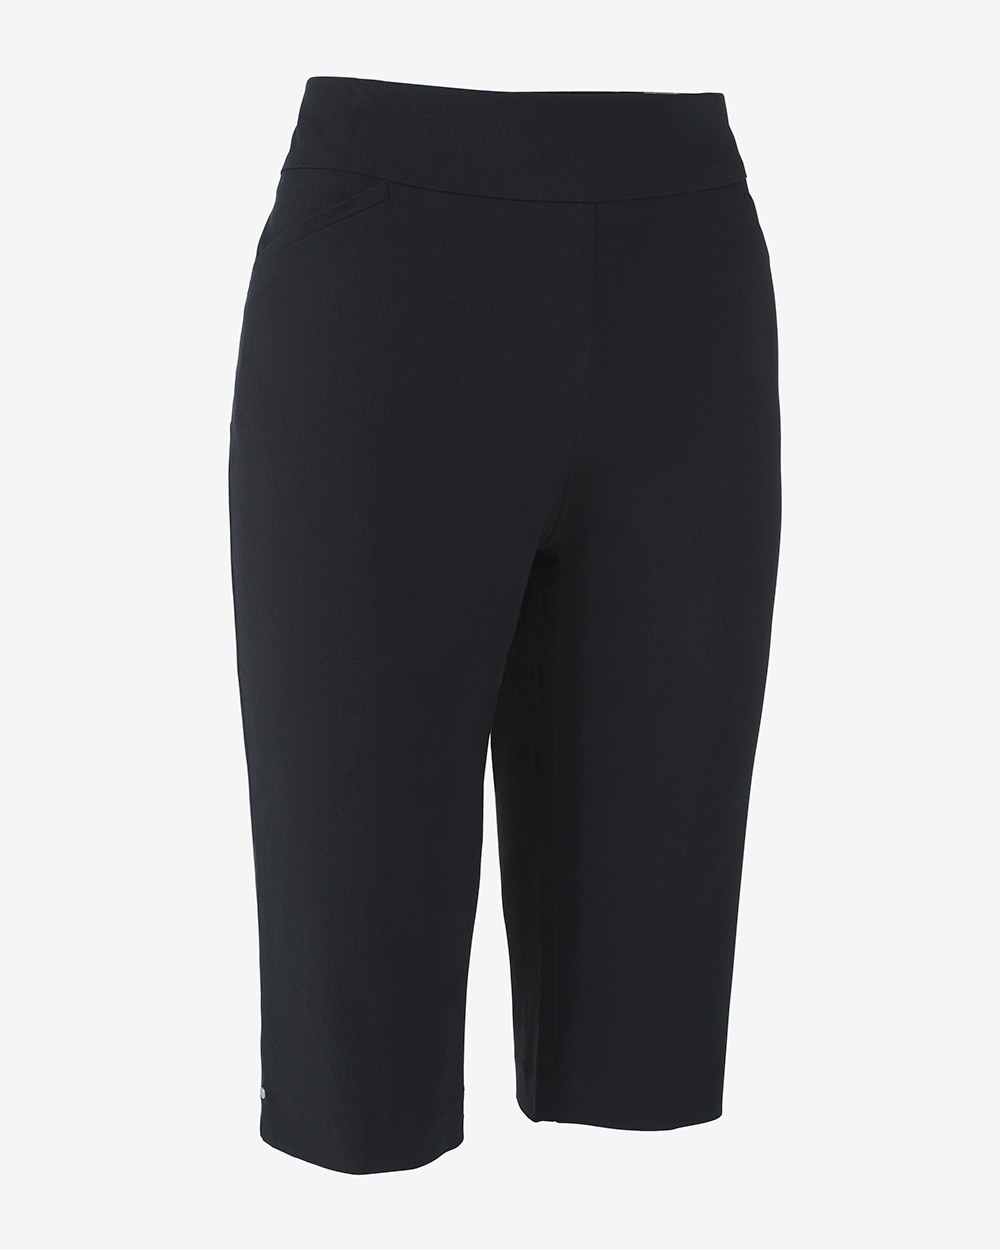 Perfect Stretch Pedal Pusher Pants